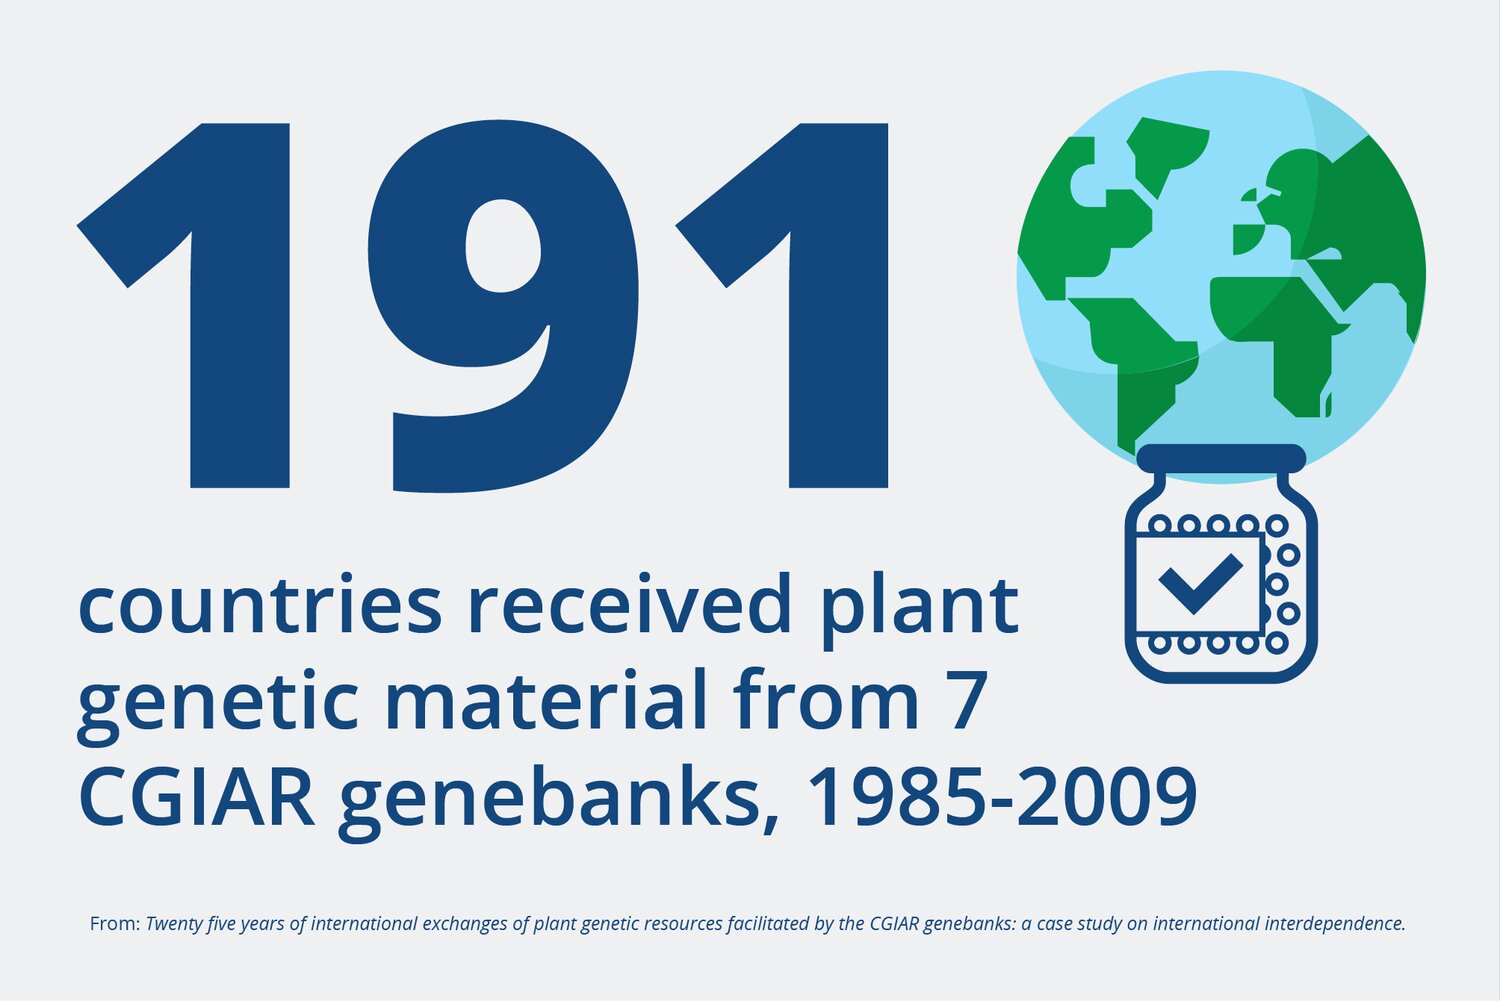 Virtually all countries in the world have been involved in the exchanges of plant genetic material: over 999,250 samples of 262,872 unique accessions belonging to 1,470 different plant species were distributed between 1985 and 2009. 